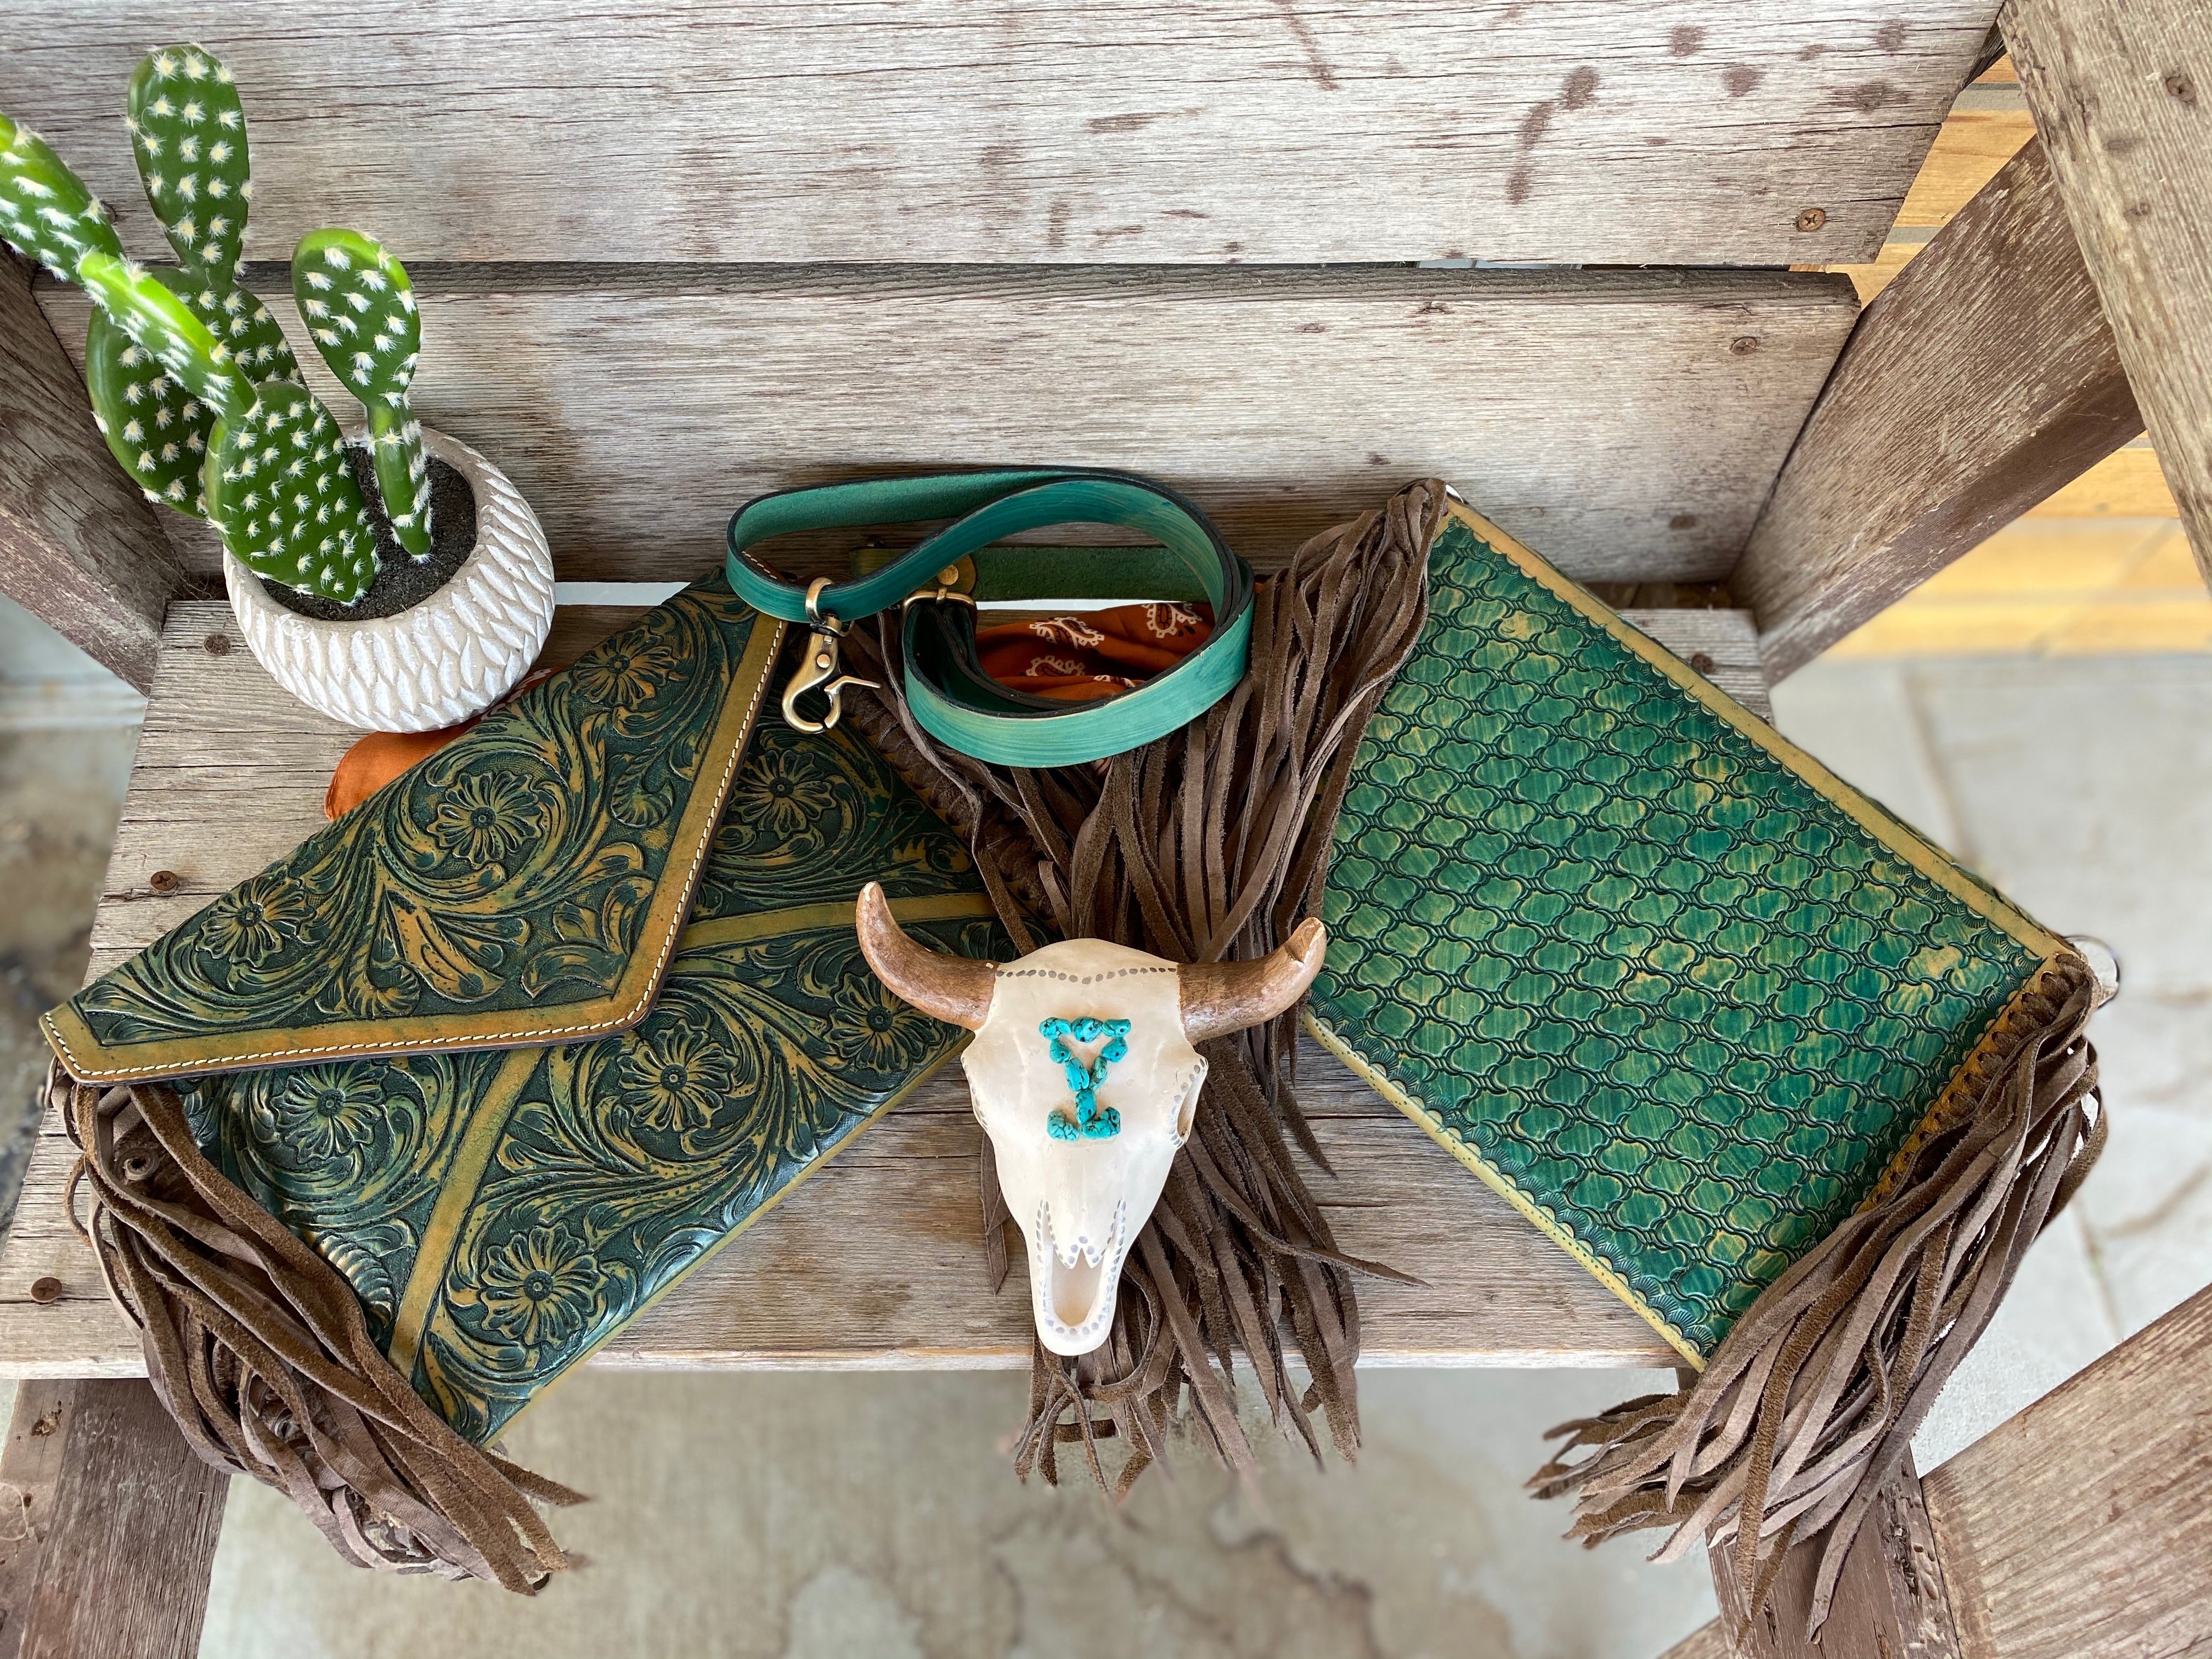 The Reckless Turquoise Fringe Purse